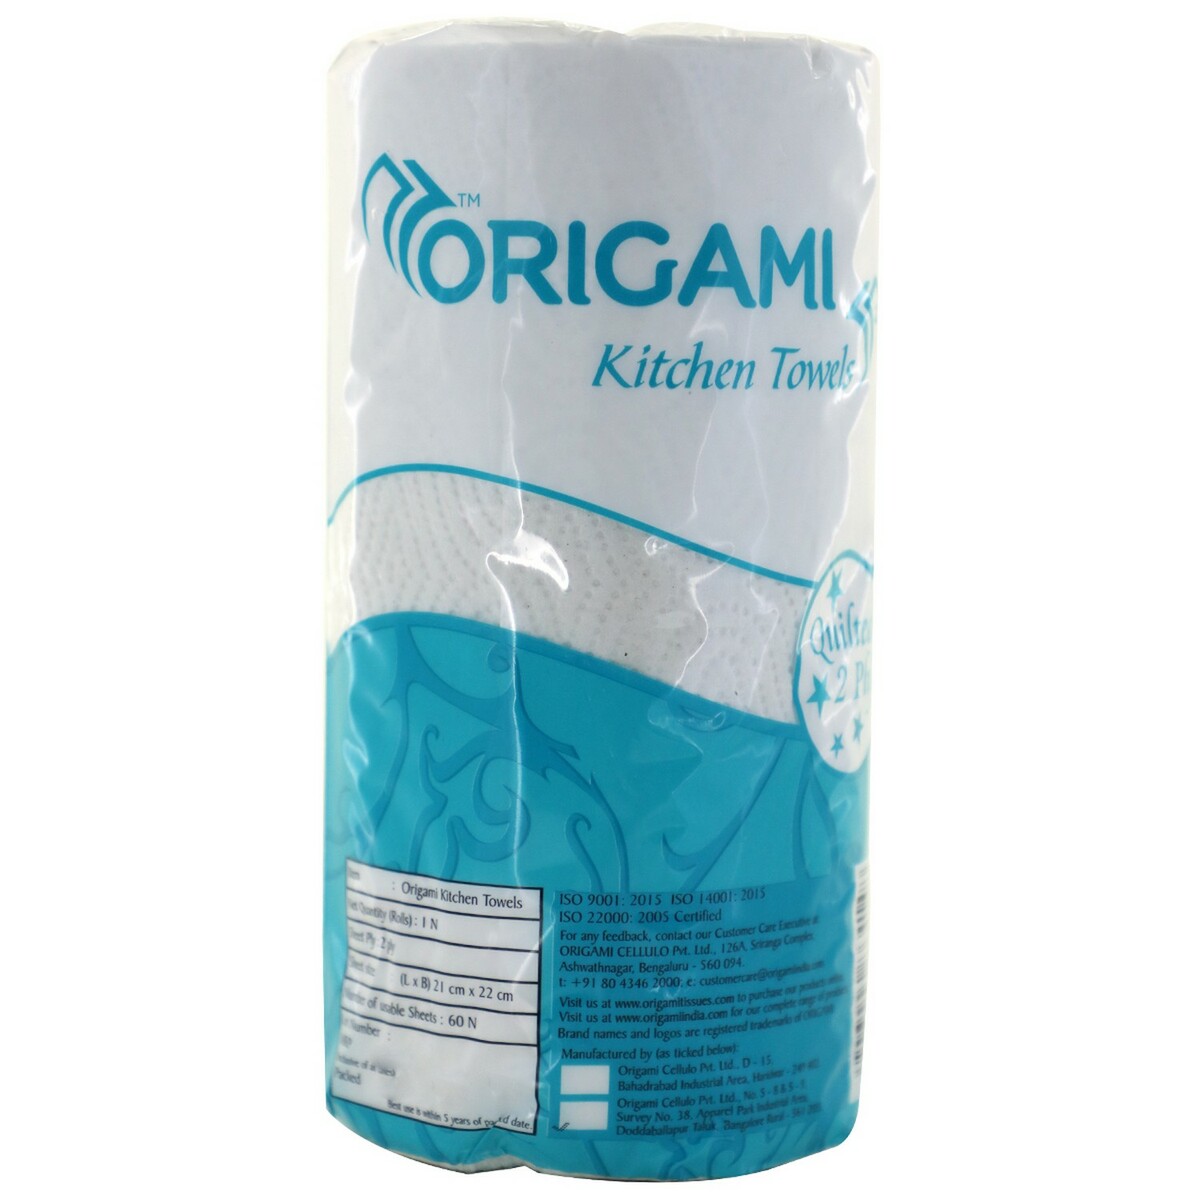 Origami Kitchen Towel 2 Ply 250g 1 Roll